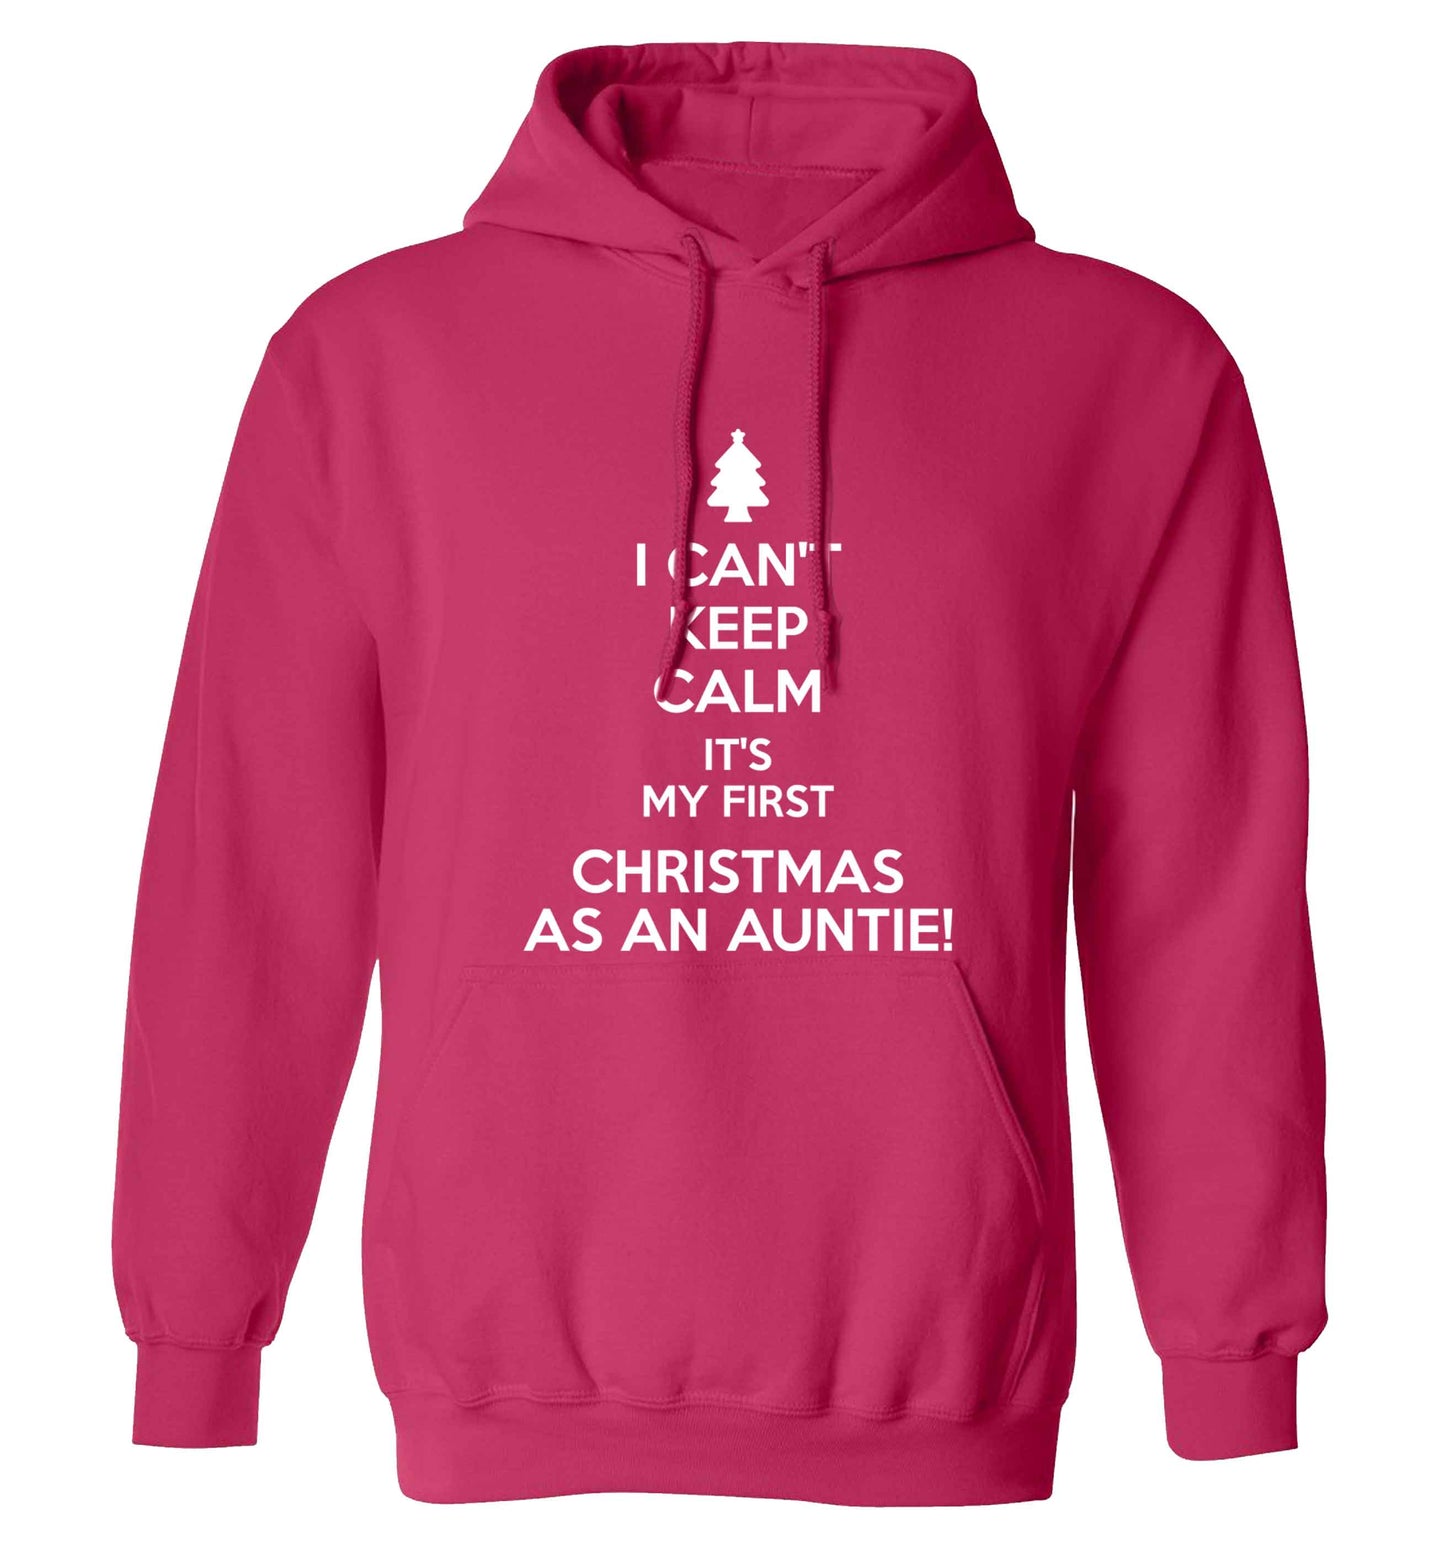 I can't keep calm it's my first Christmas as an auntie! adults unisex pink hoodie 2XL